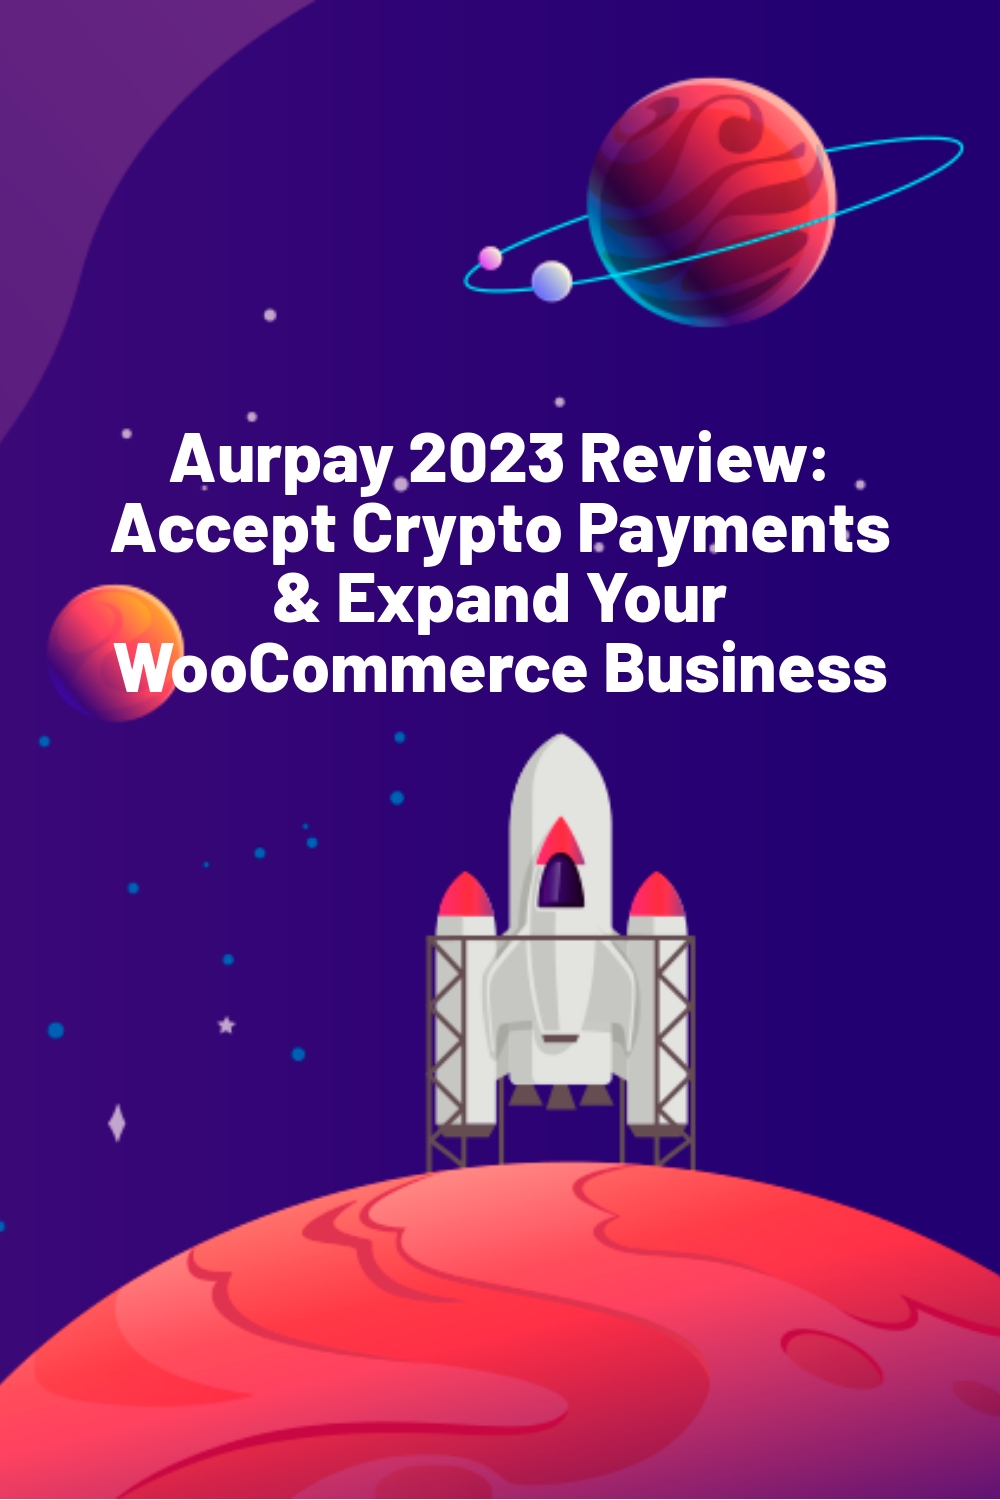 Aurpay 2023 Review: Accept Crypto Payments & Expand Your WooCommerce Business